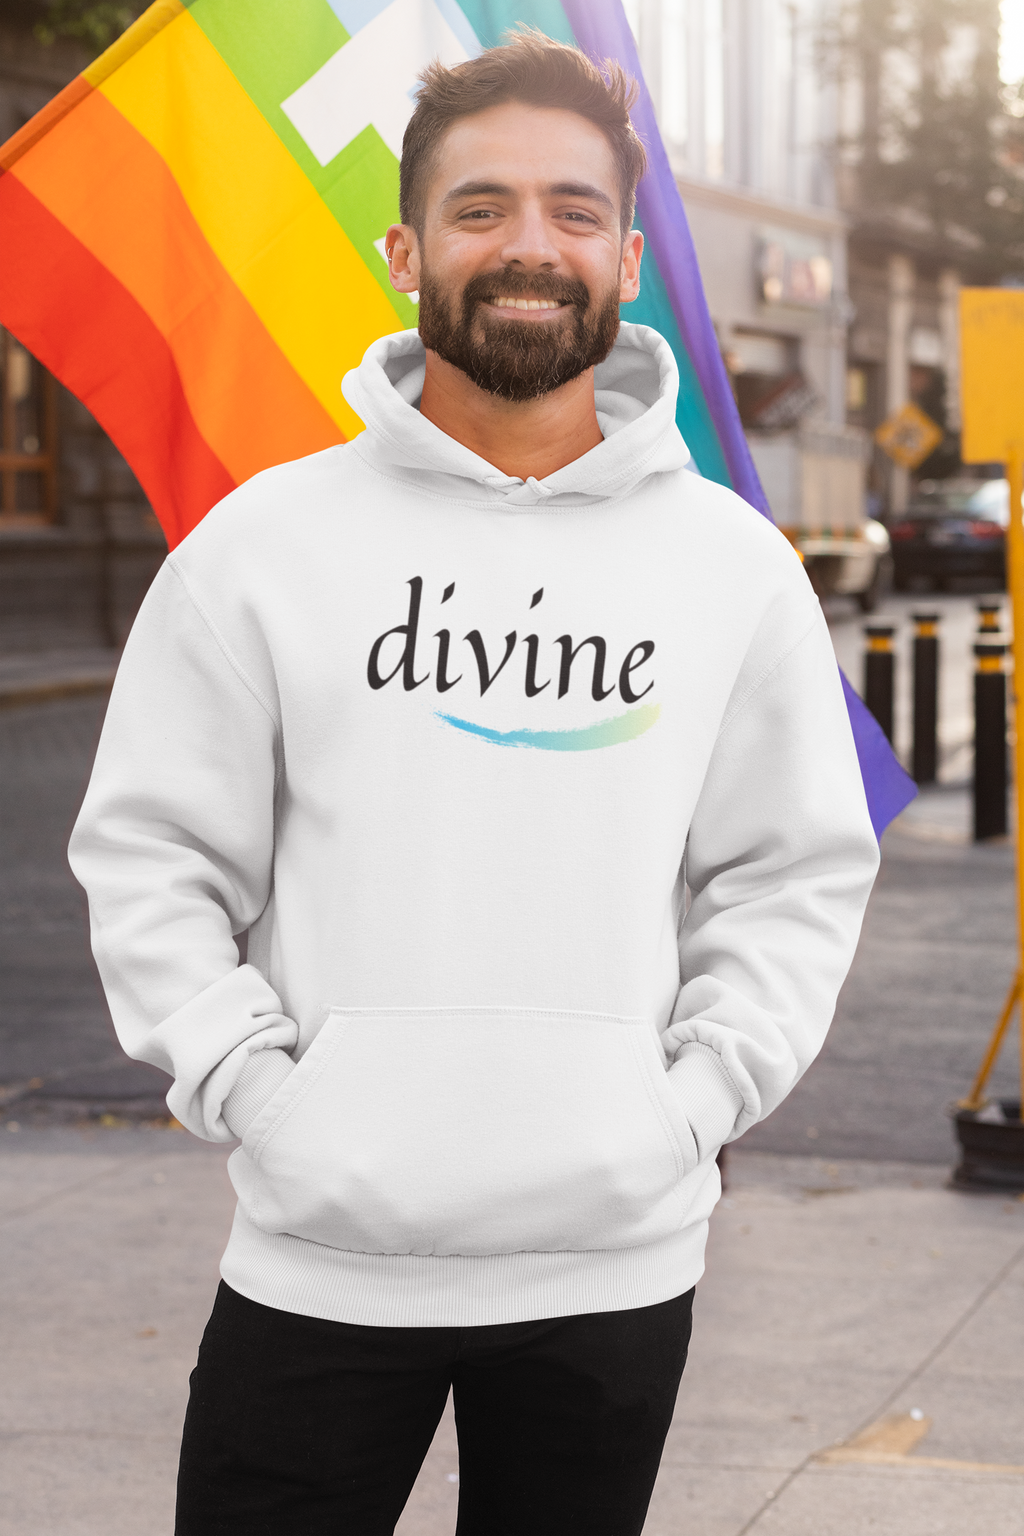 Divine Unisex Hooded Sweatshirt, Classic Fit, Gift Item - Cheers Together Gift House